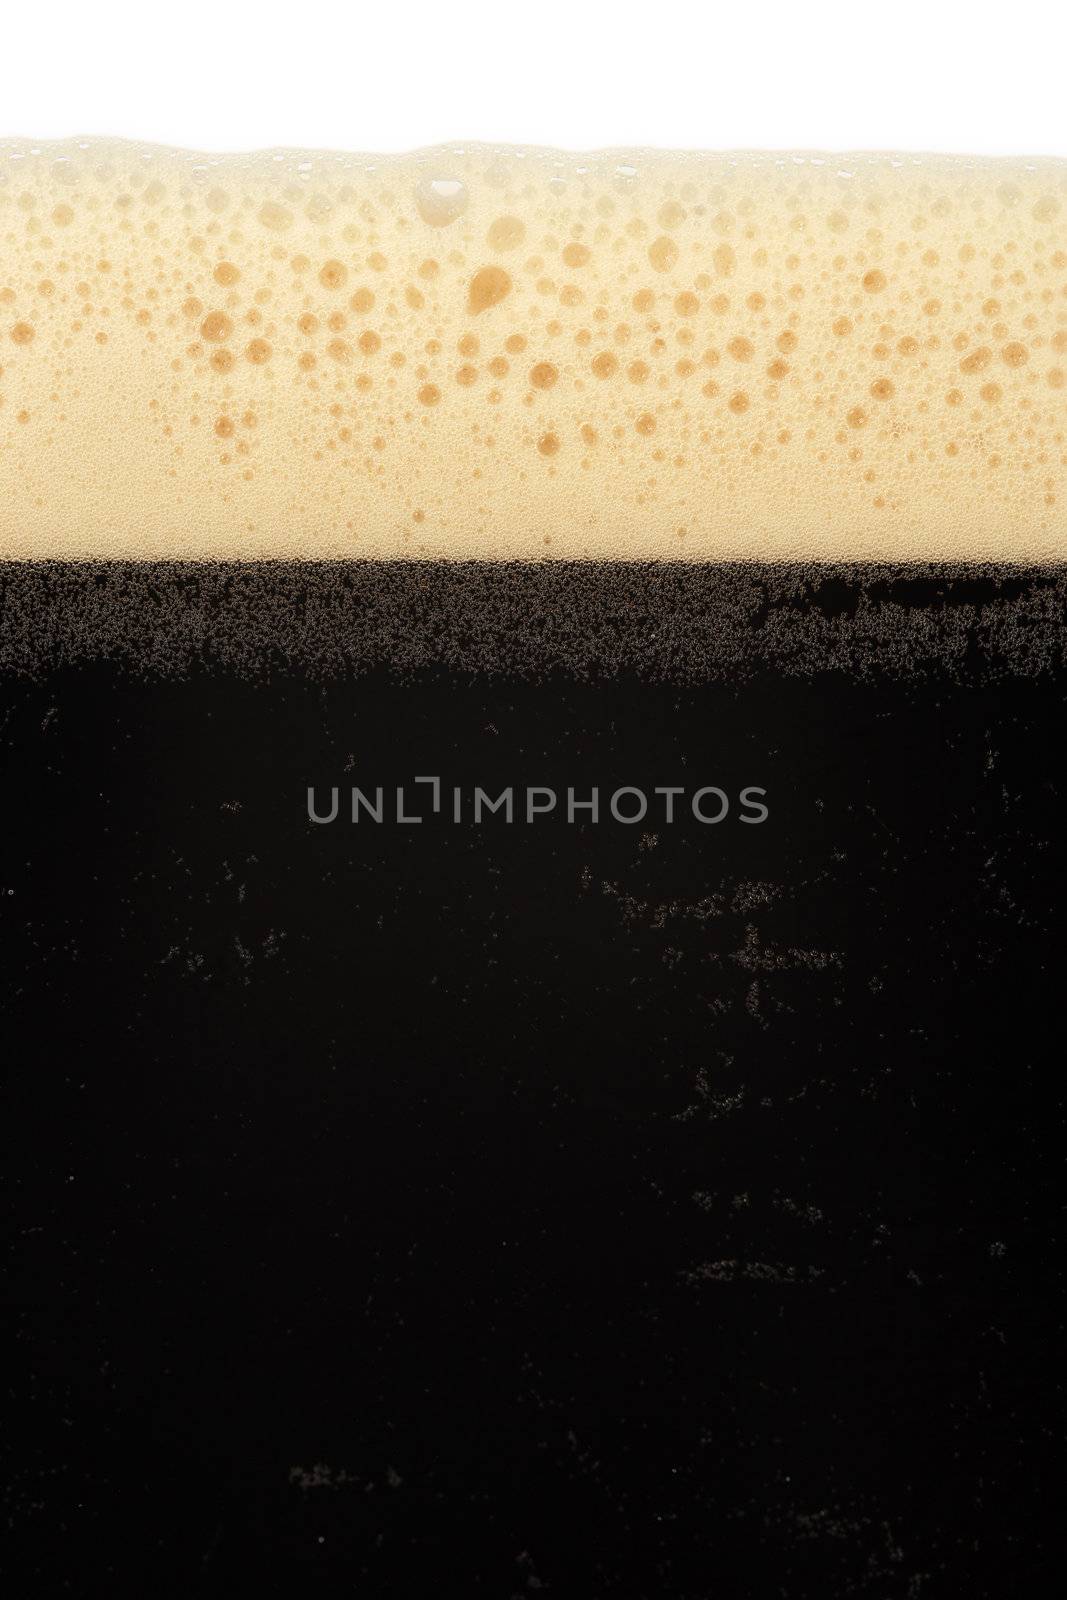 Stout beer by sumners